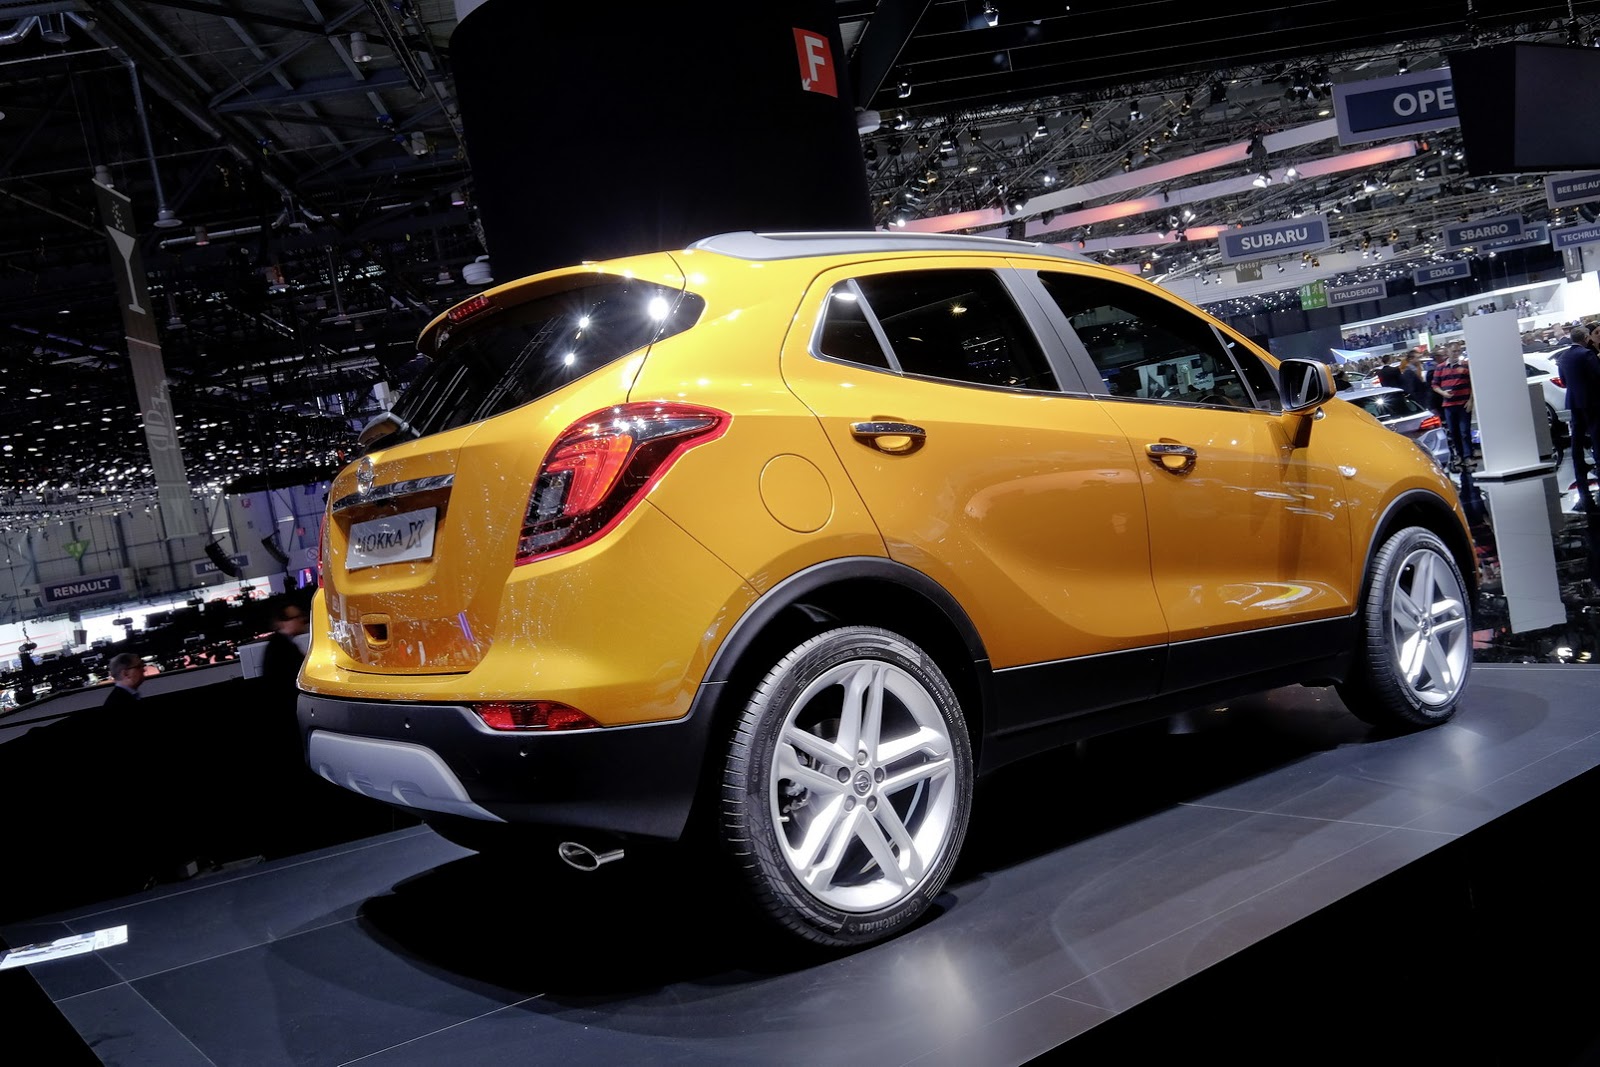 Facelifted Opel Mokka X Is A Sign Of Things To Come For Buick's Encore | Carscoops1600 x 1067